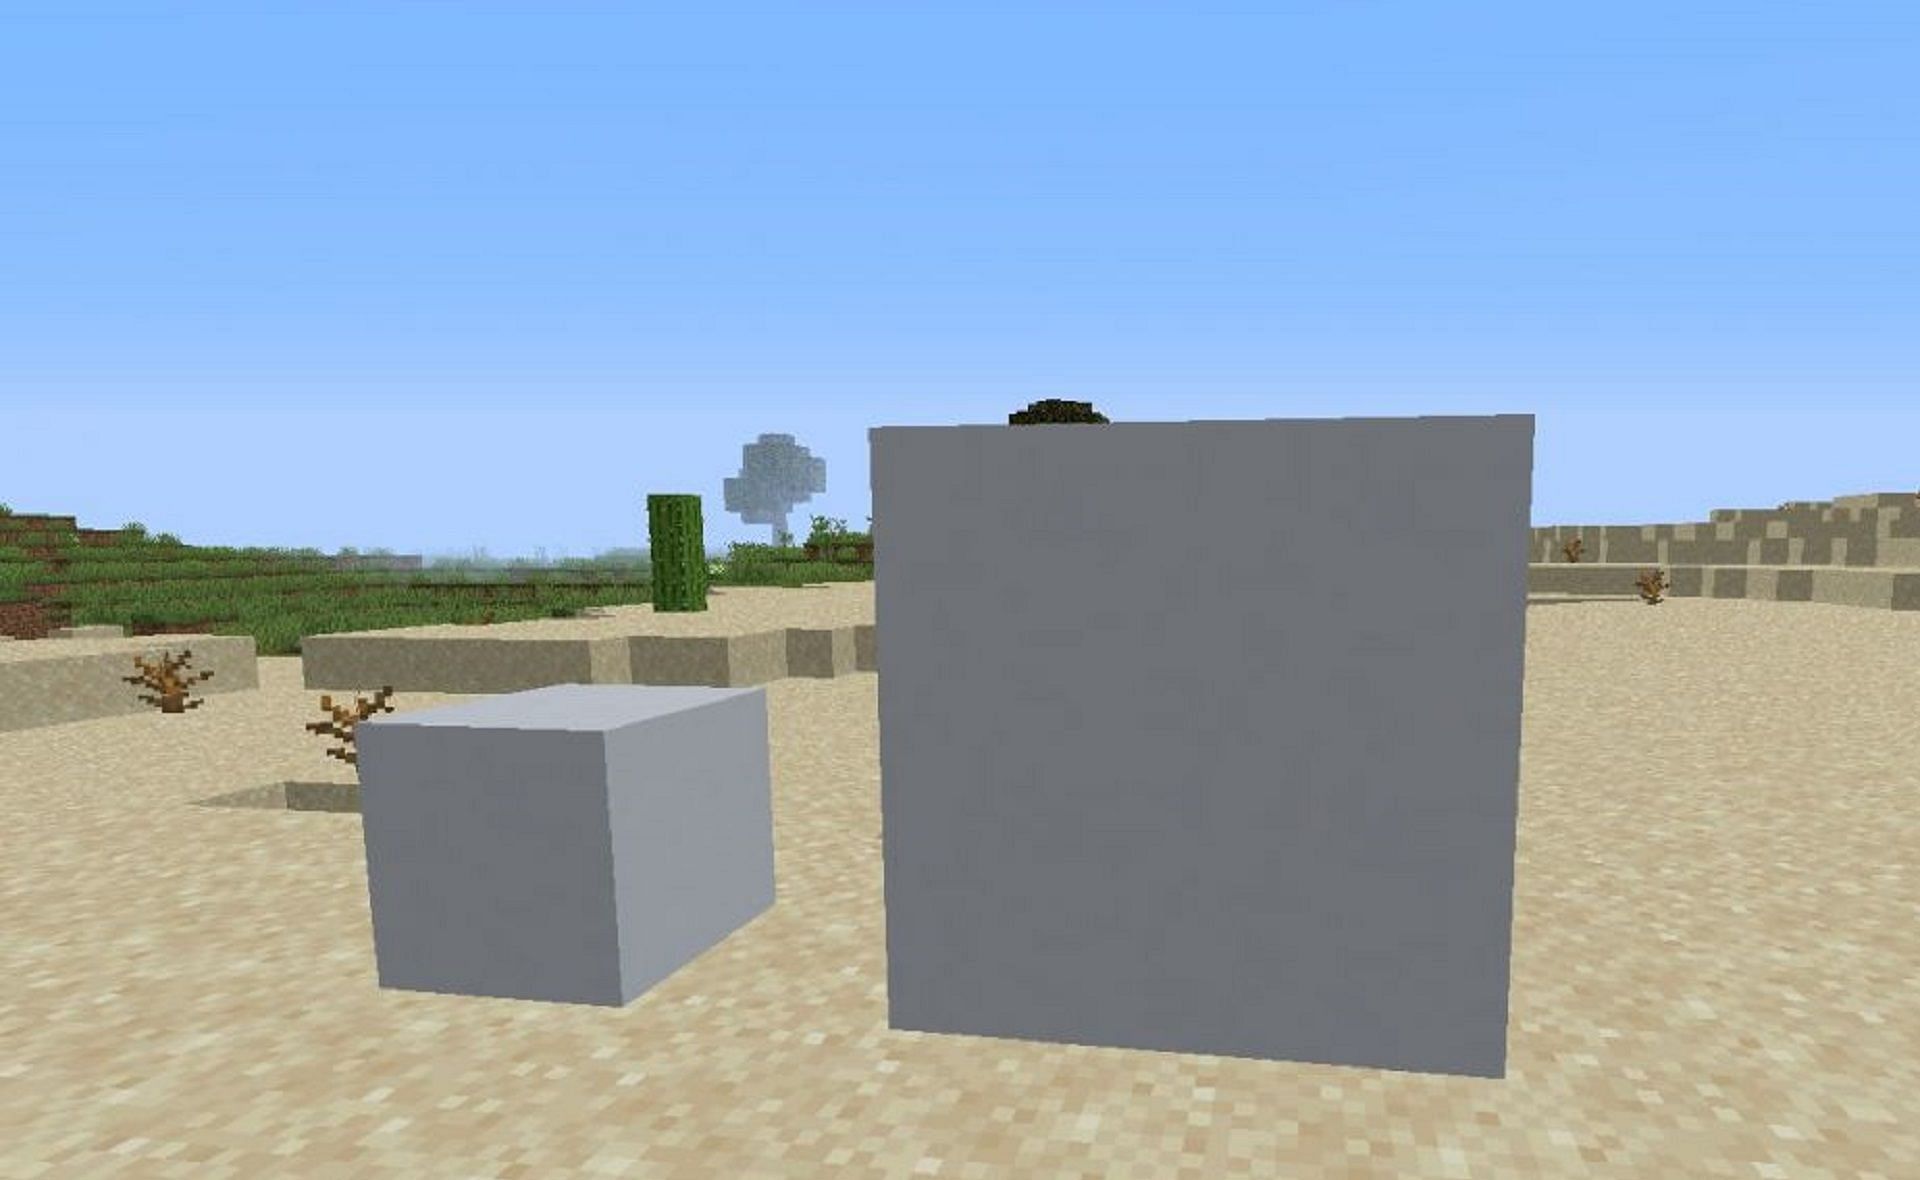 Concrete Stairs for Minecraft 1.19.3